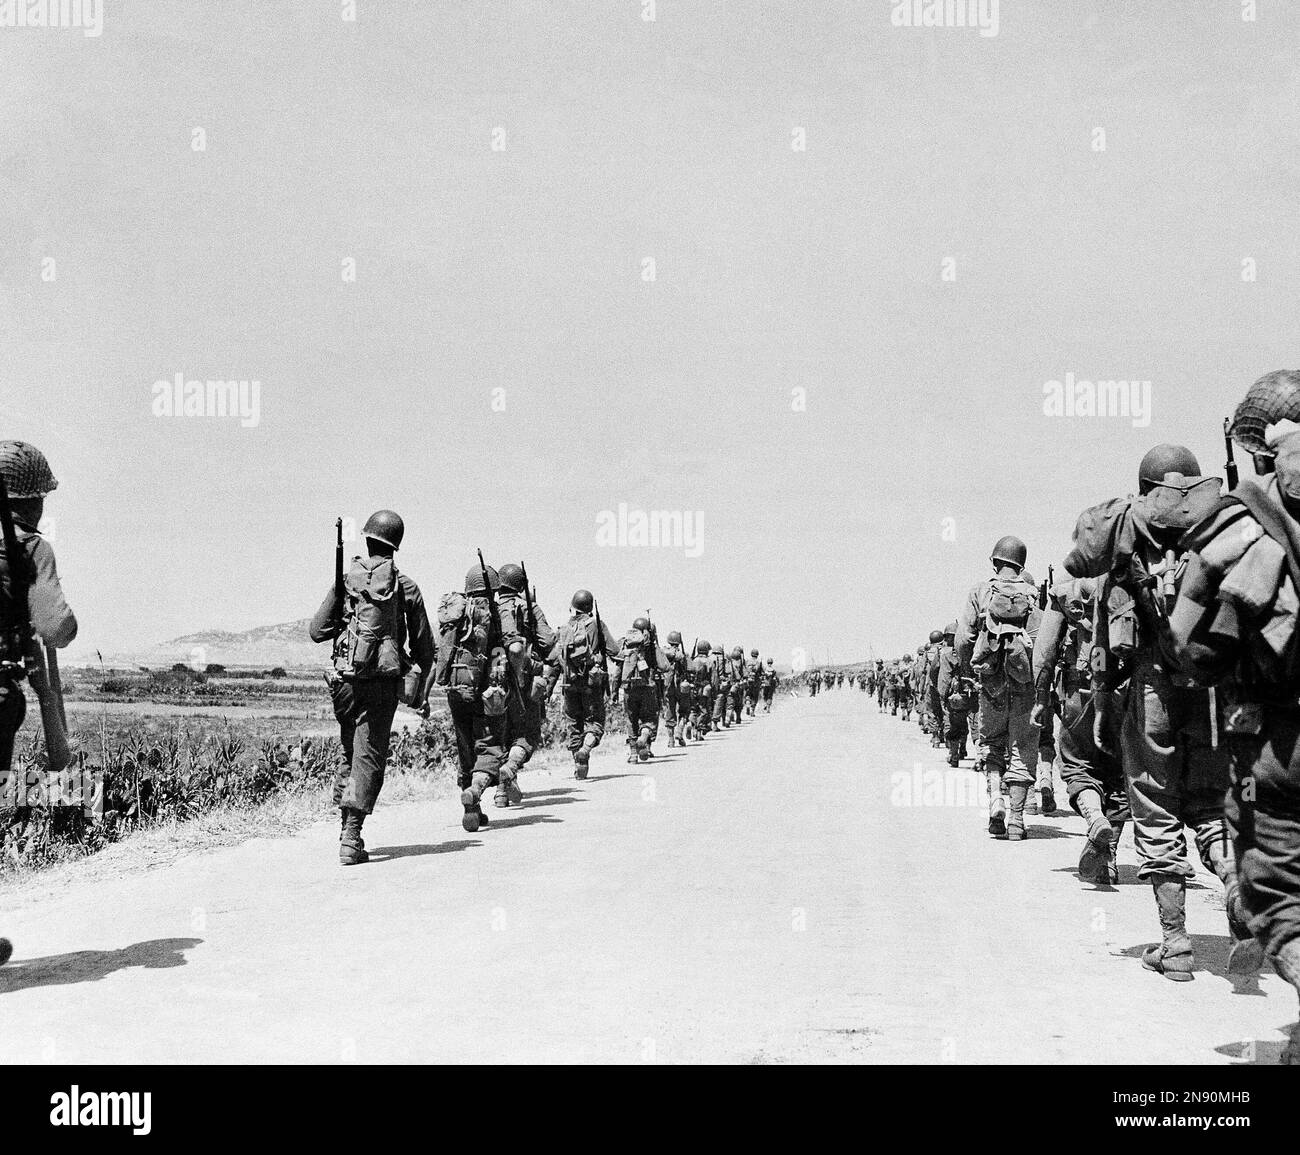 After successfully establishing beachheads in the invasion of Sicily, American troops file on both sides of a road toward the interior of the Italian island on July 24, 1943. (AP Photo) Stockfoto